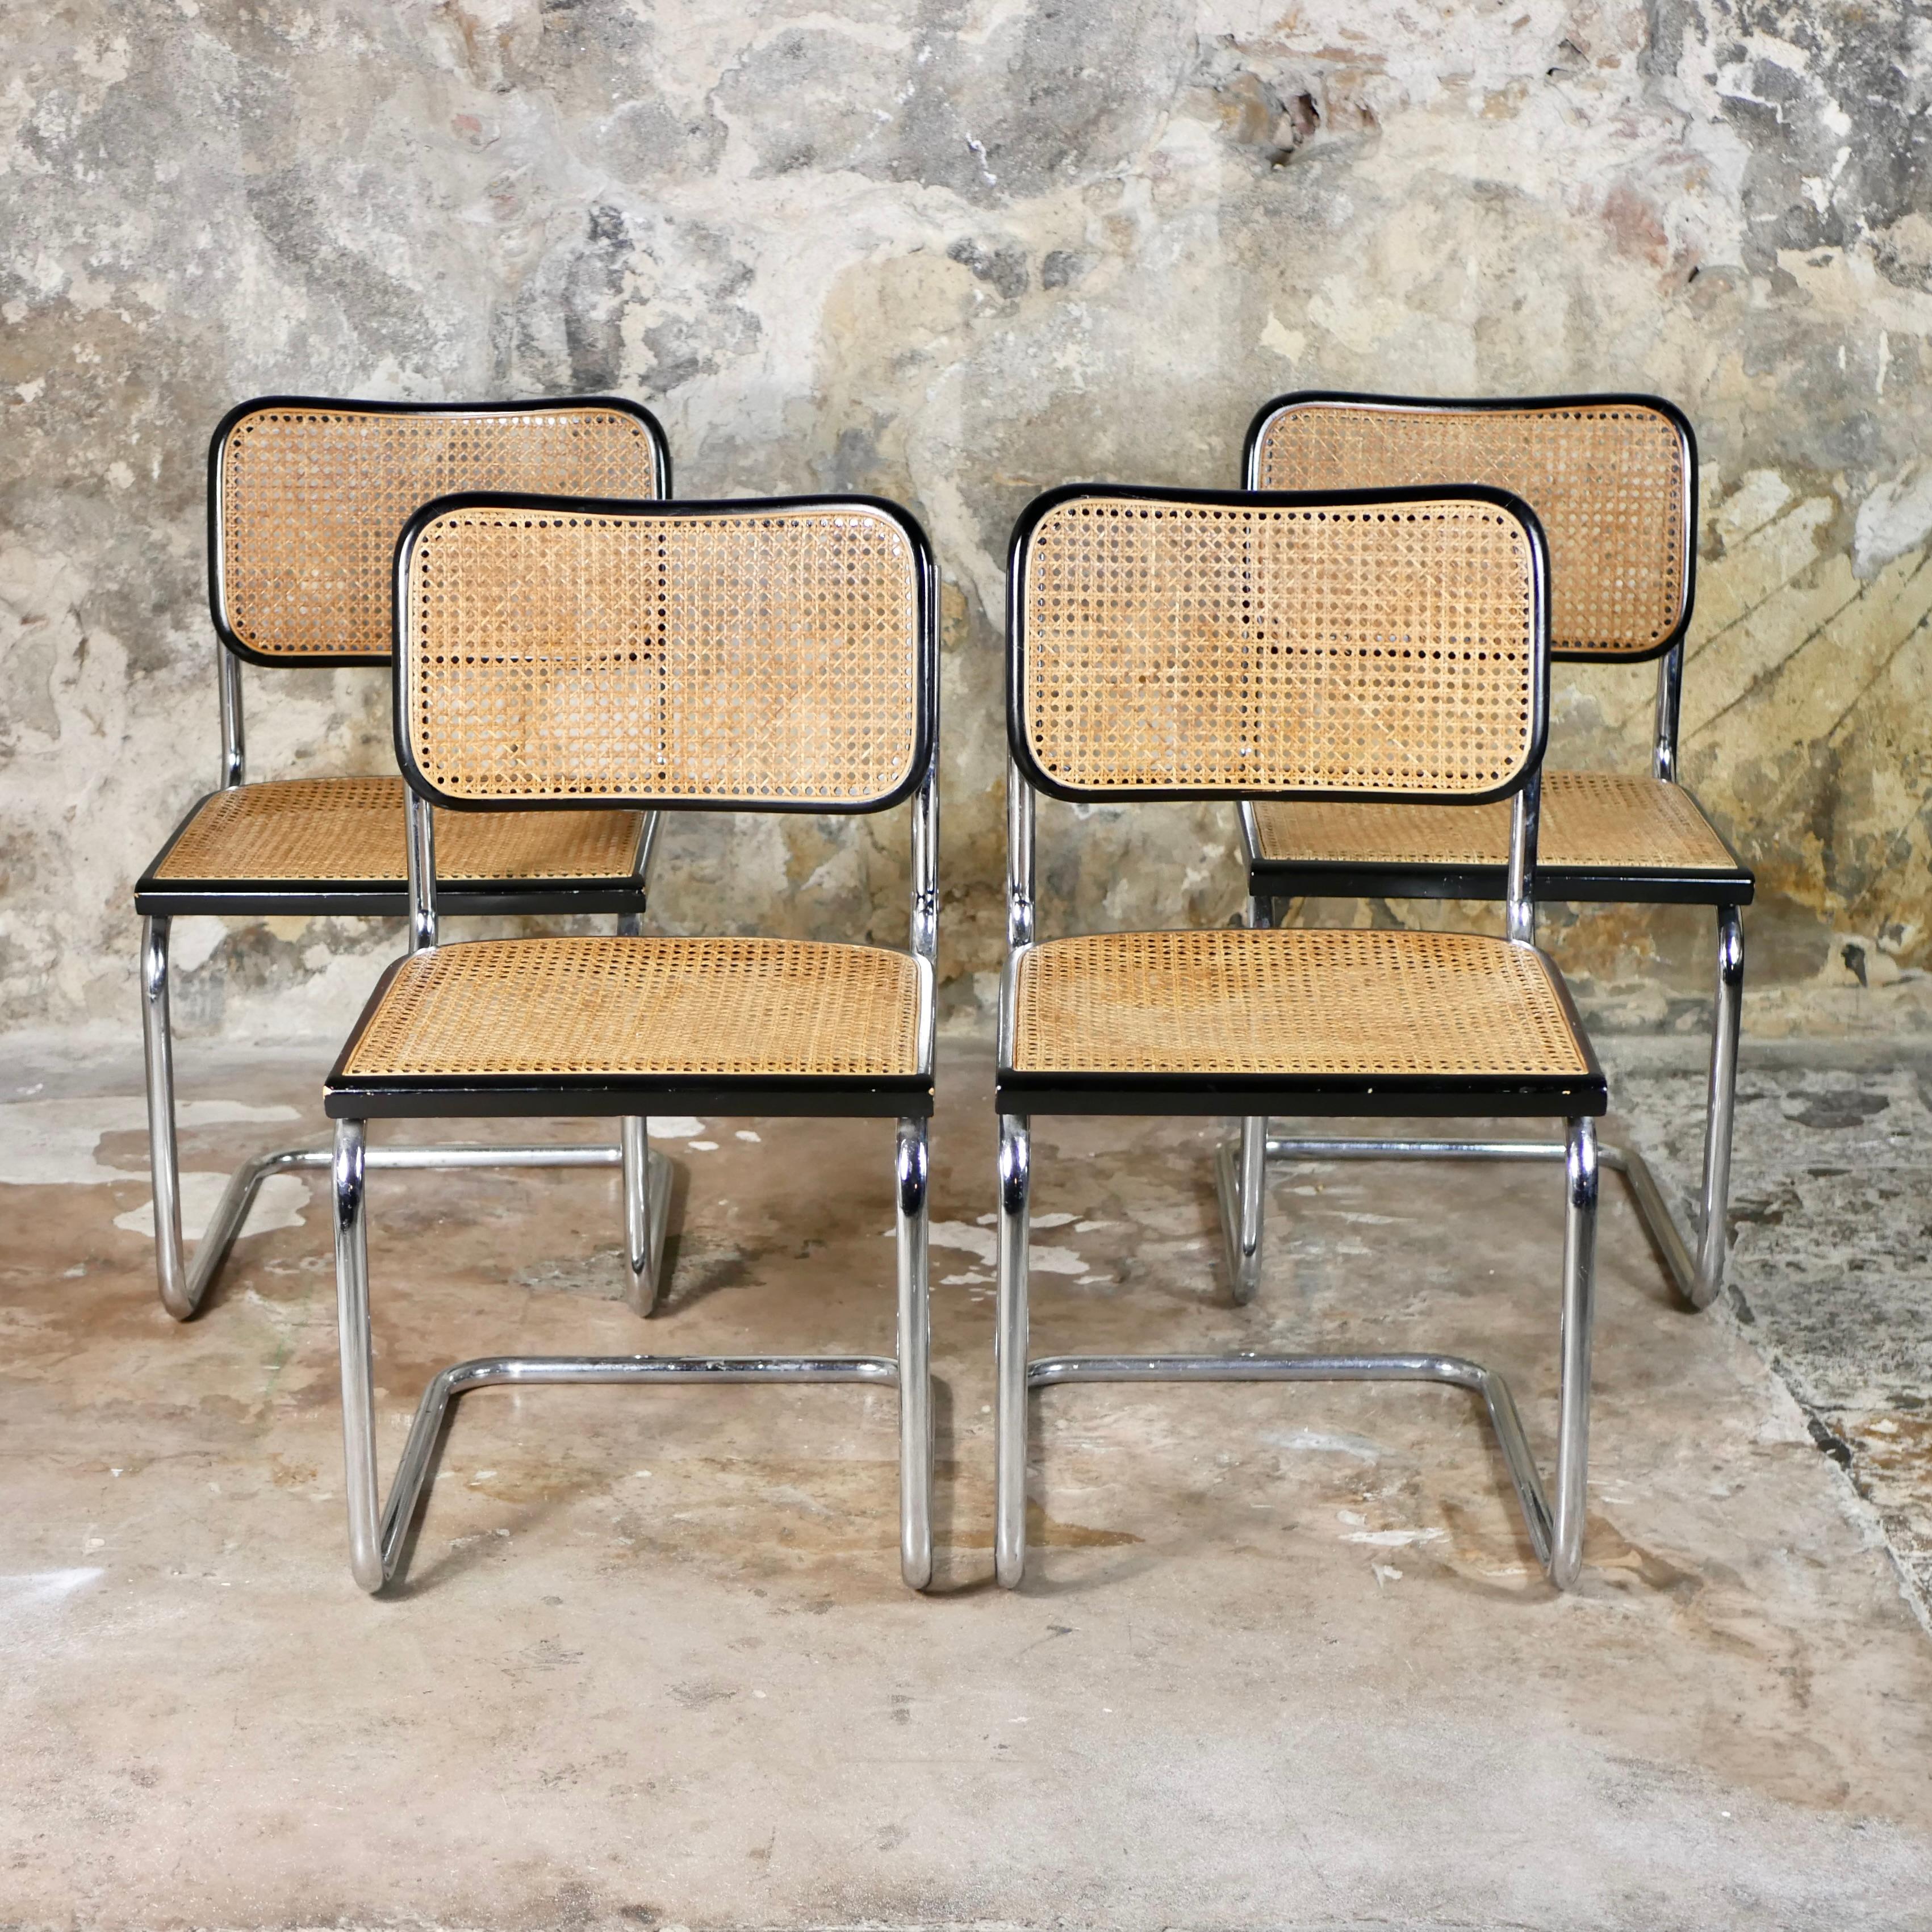 Beautiful set of 4 Cesca chairs designed in 1928 by Marcel Breuer.
These have been made in Italy in the 1970s.
Original cane seats, black lacquered beech wood frame, tubular metal structure.
In good condition, nice details.
